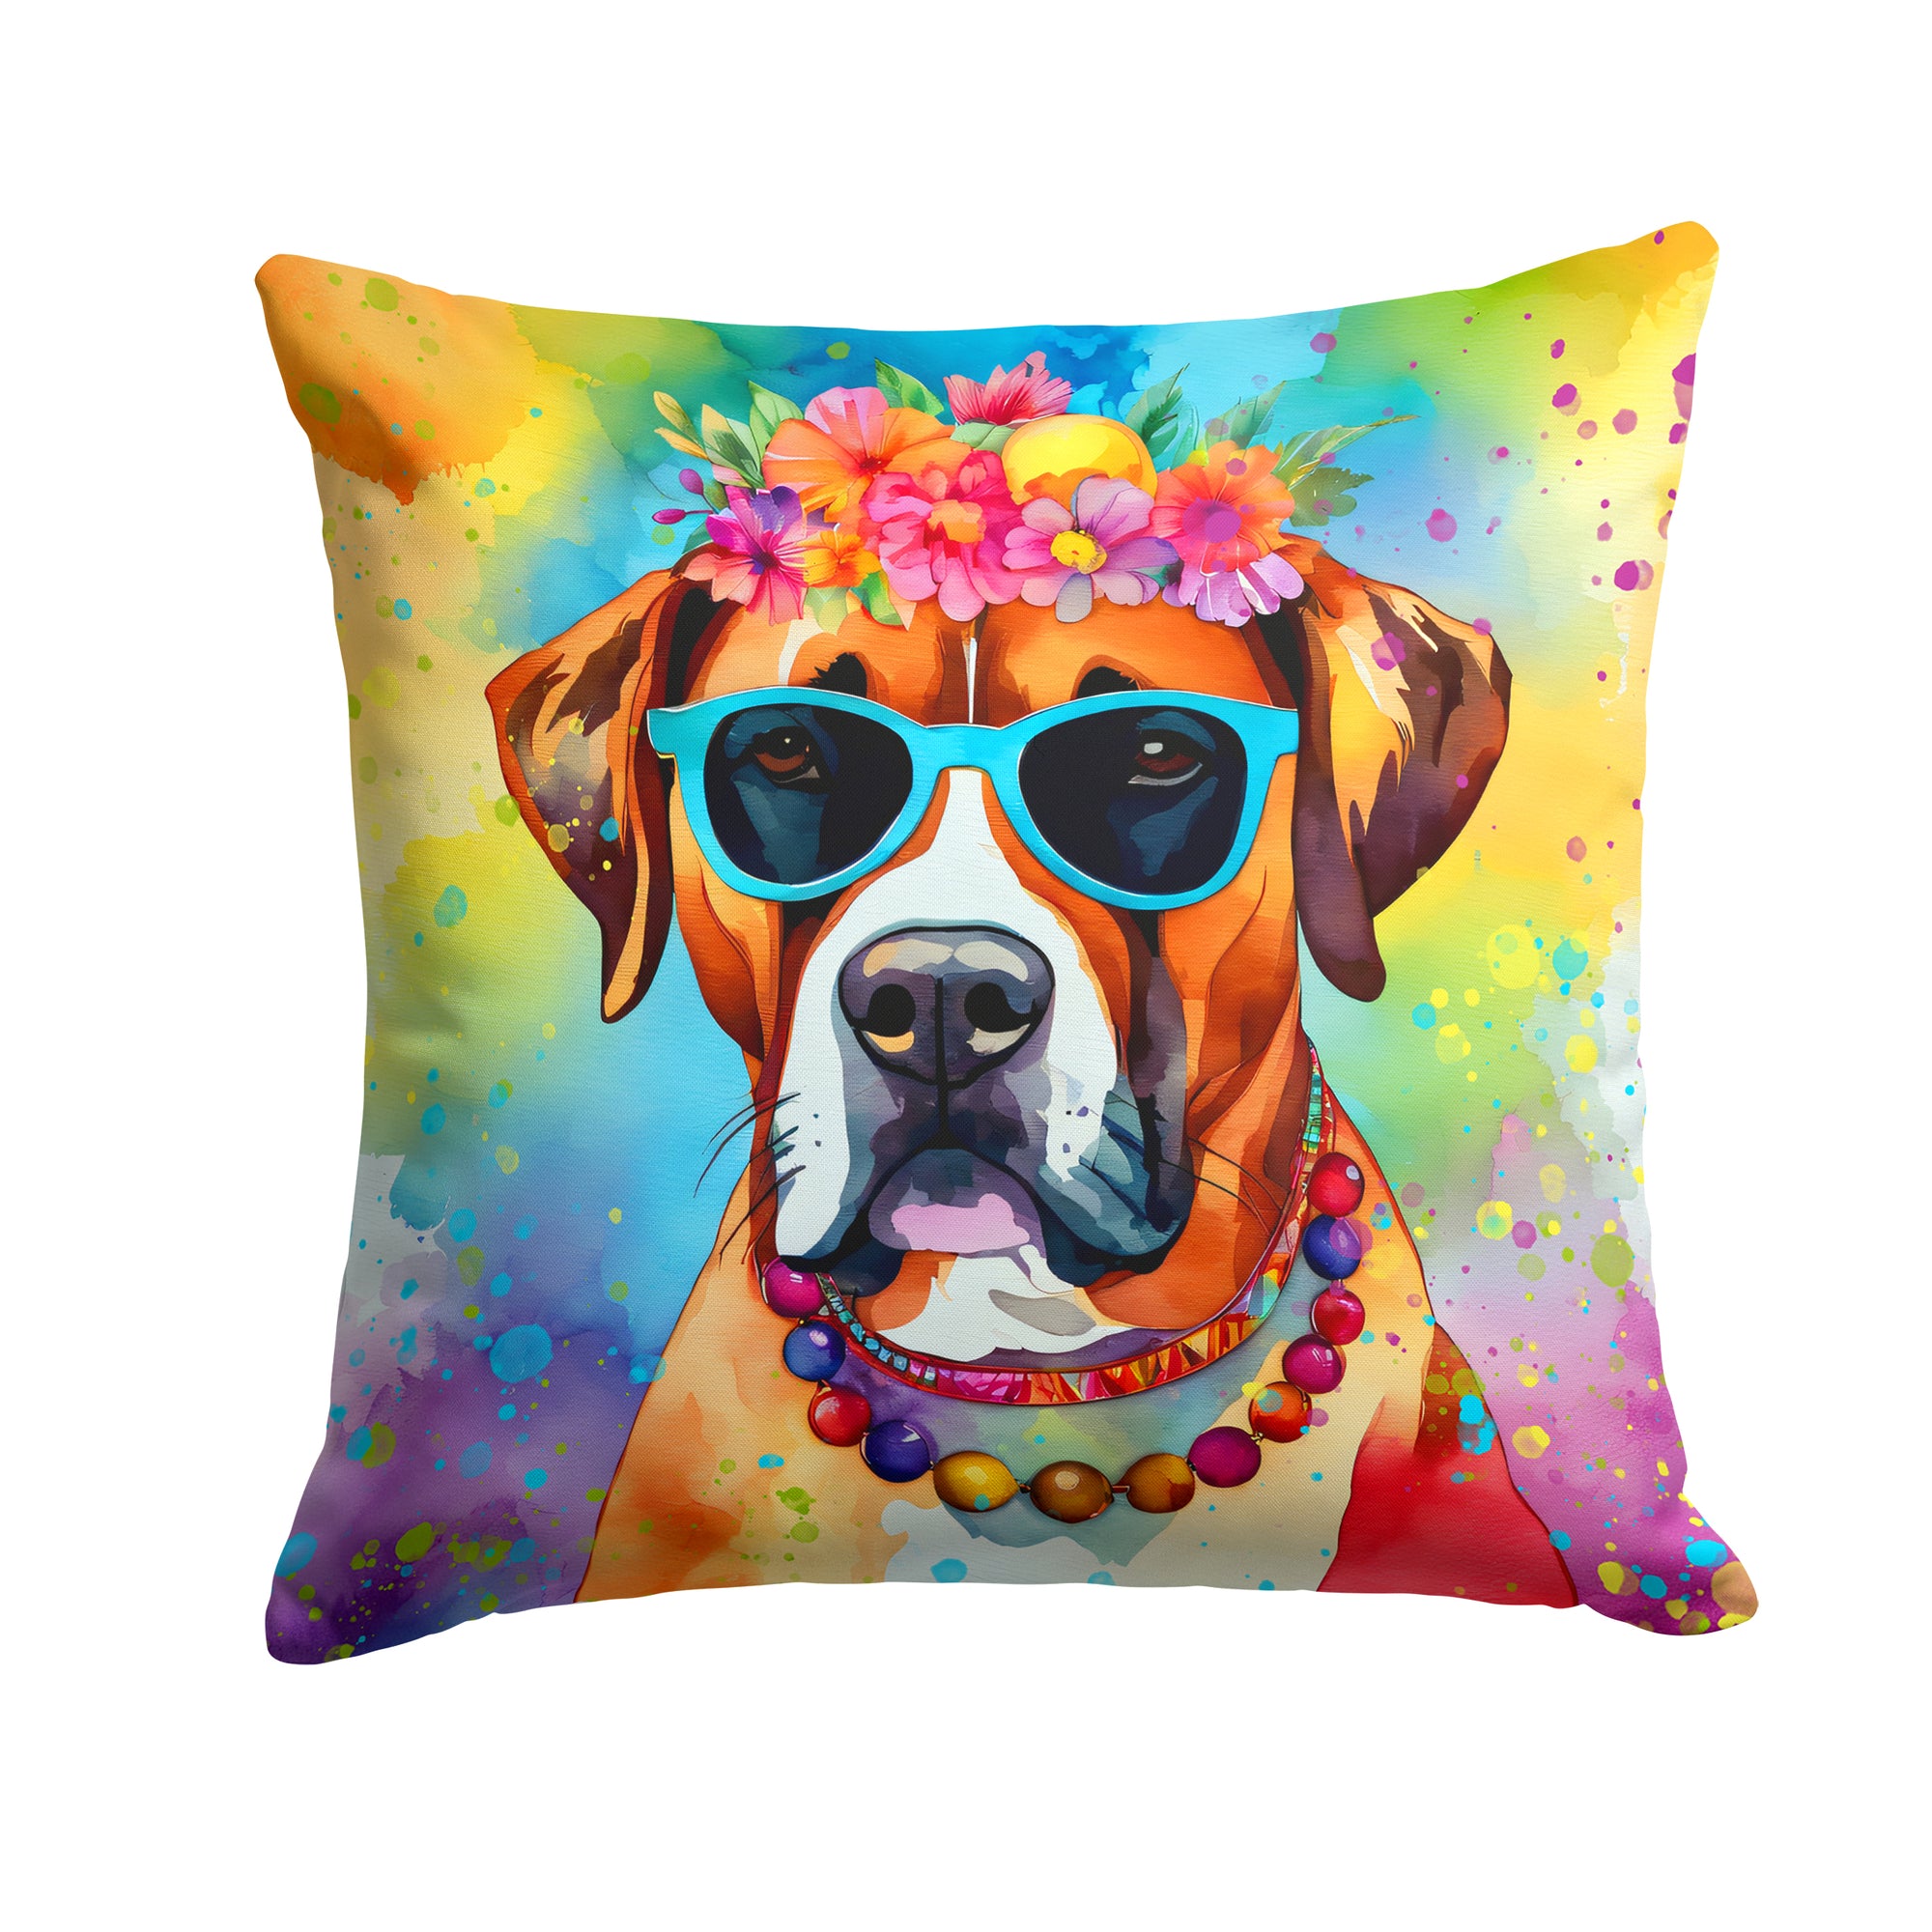 Buy this Boxer Hippie Dawg Fabric Decorative Pillow